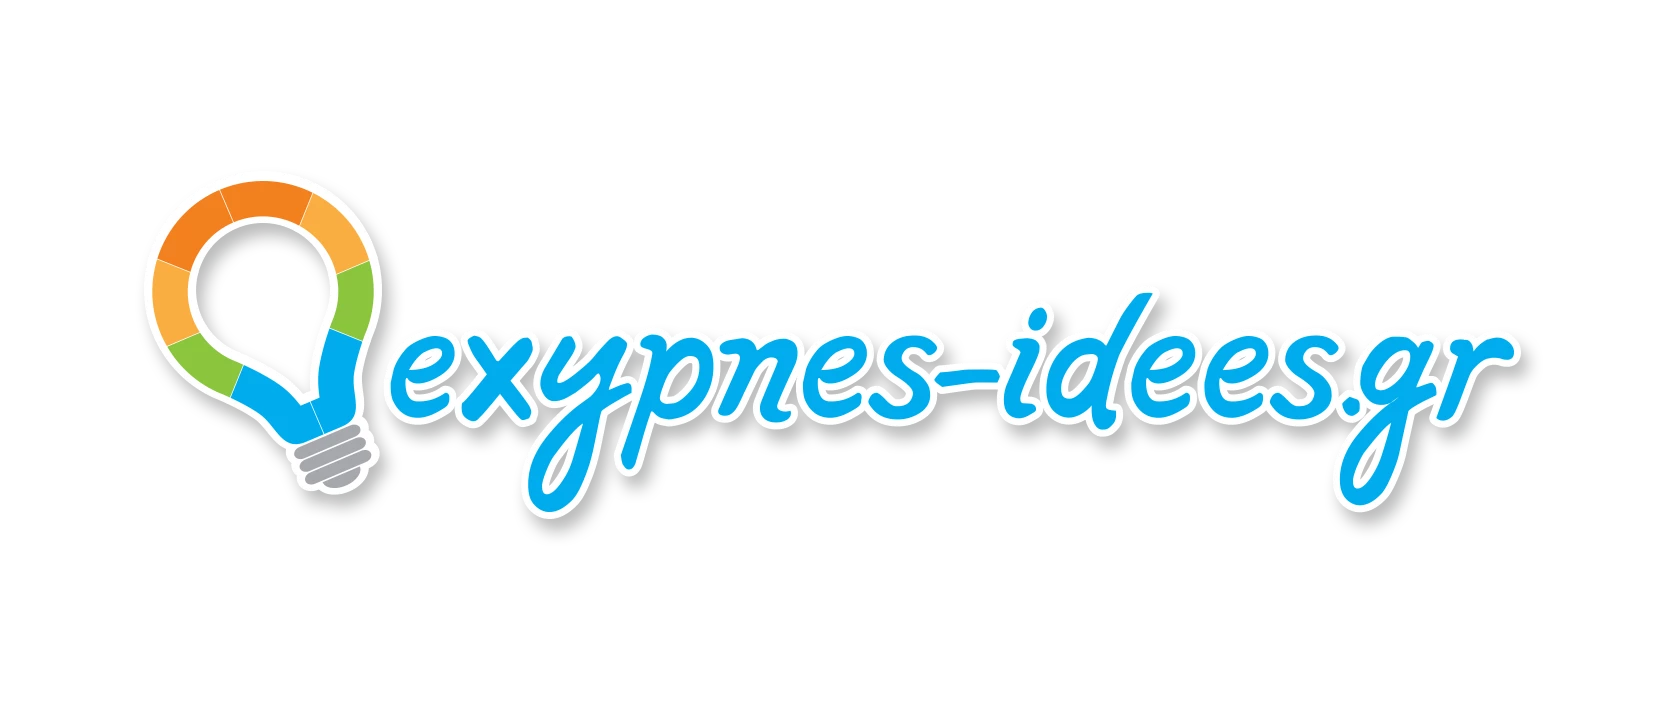 exypnes-idees.gr